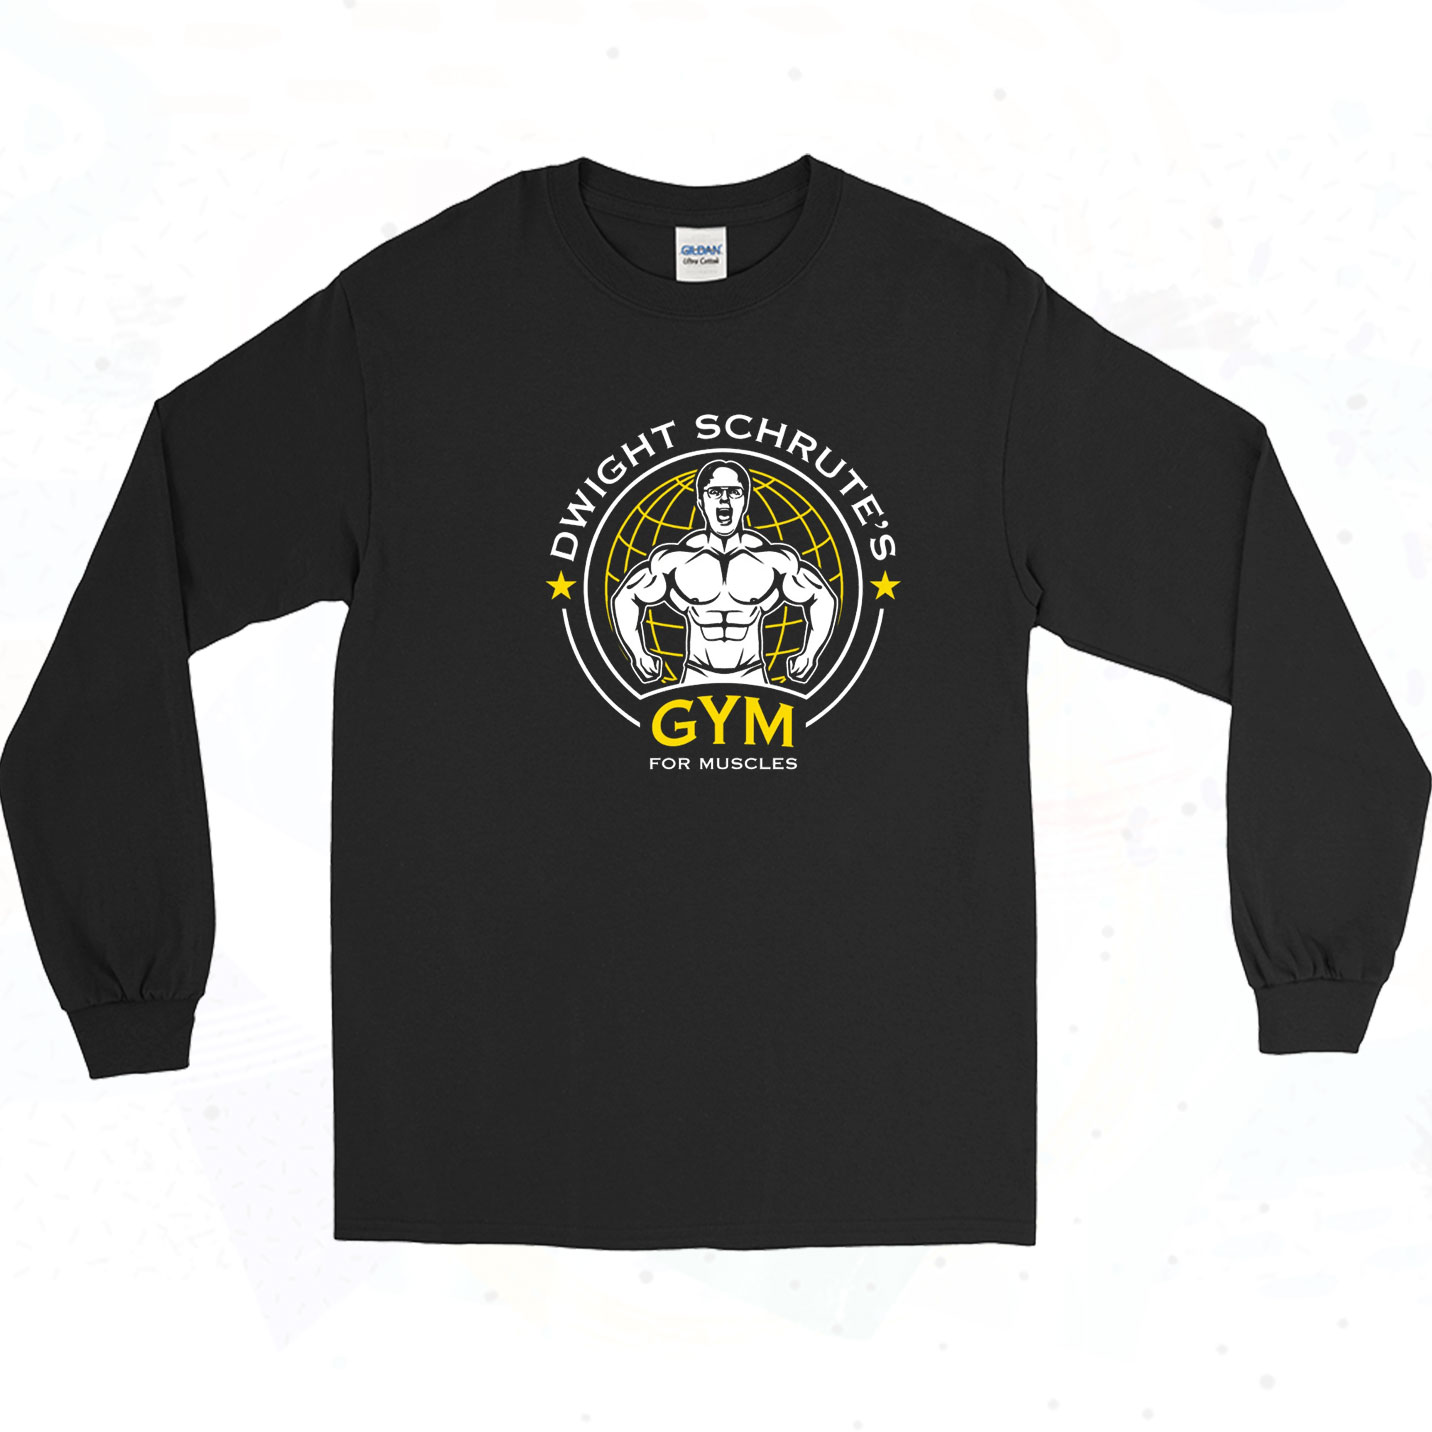 Dwight Schrutes Gym For Muscles Long Sleeve Shirt - 90sclothes.com